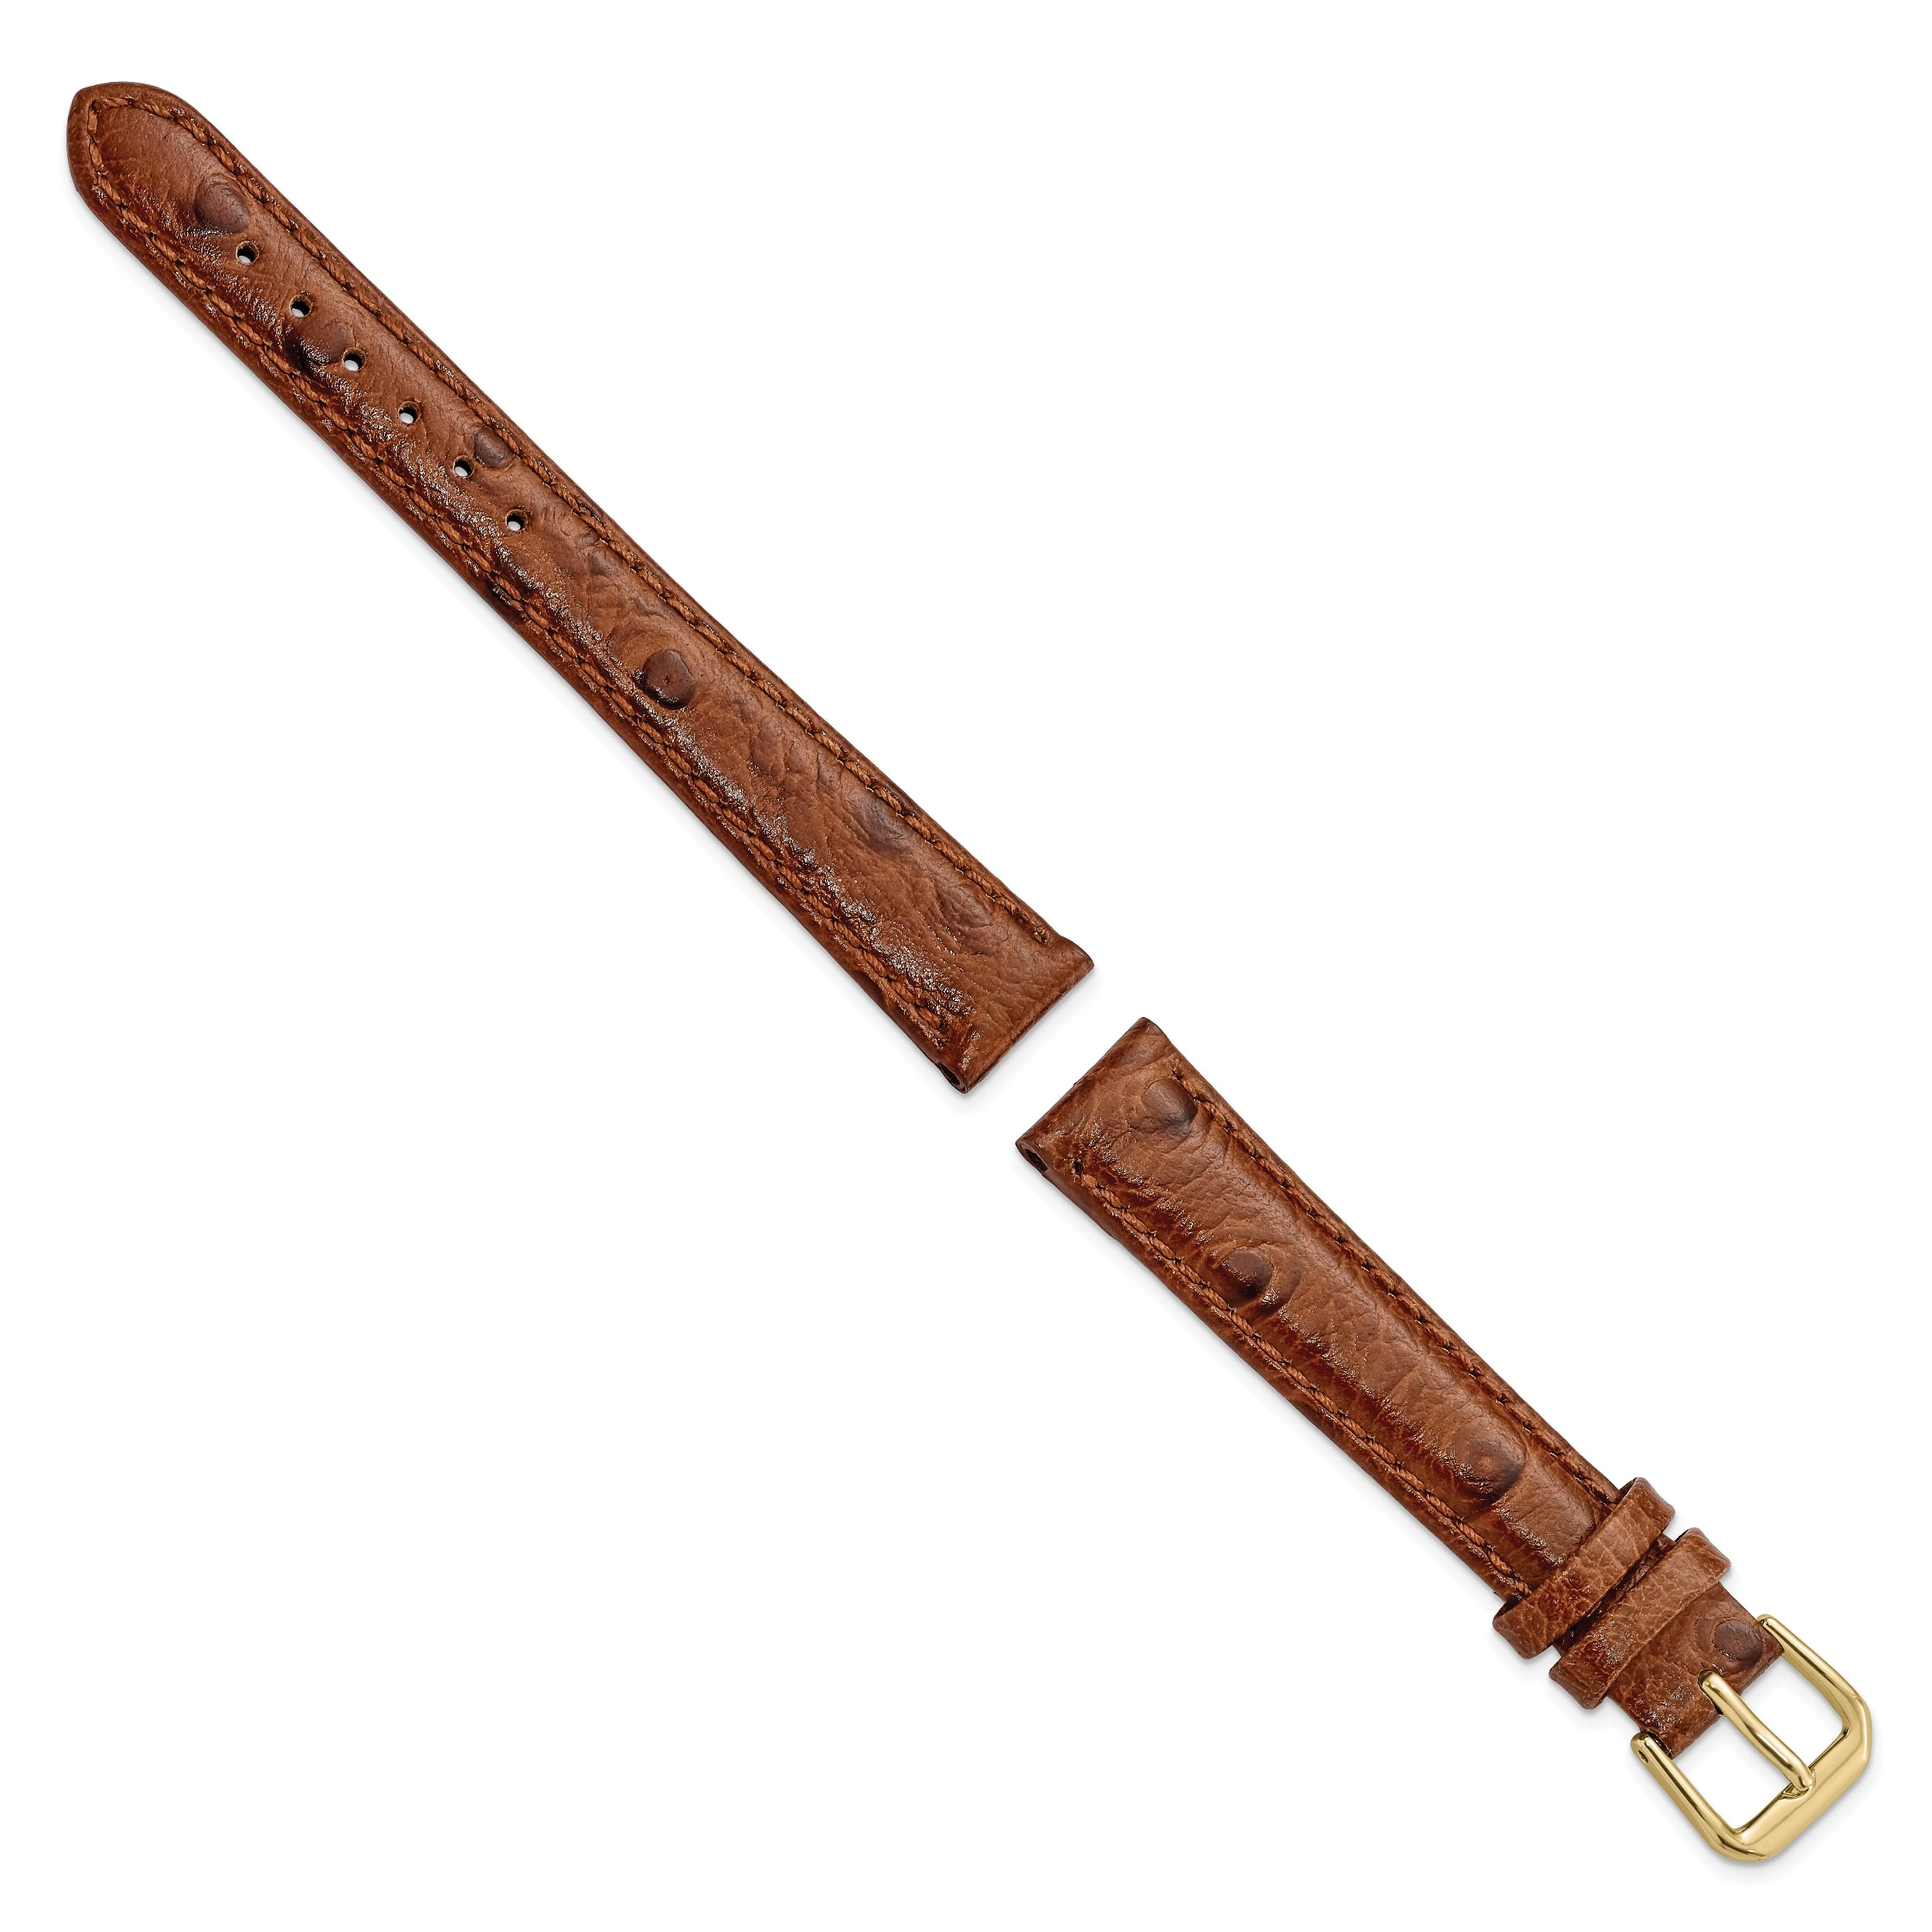 14mm Havana Ostrich Grain Leather with Gold-tone Buckle 6.75 inch Watch Band